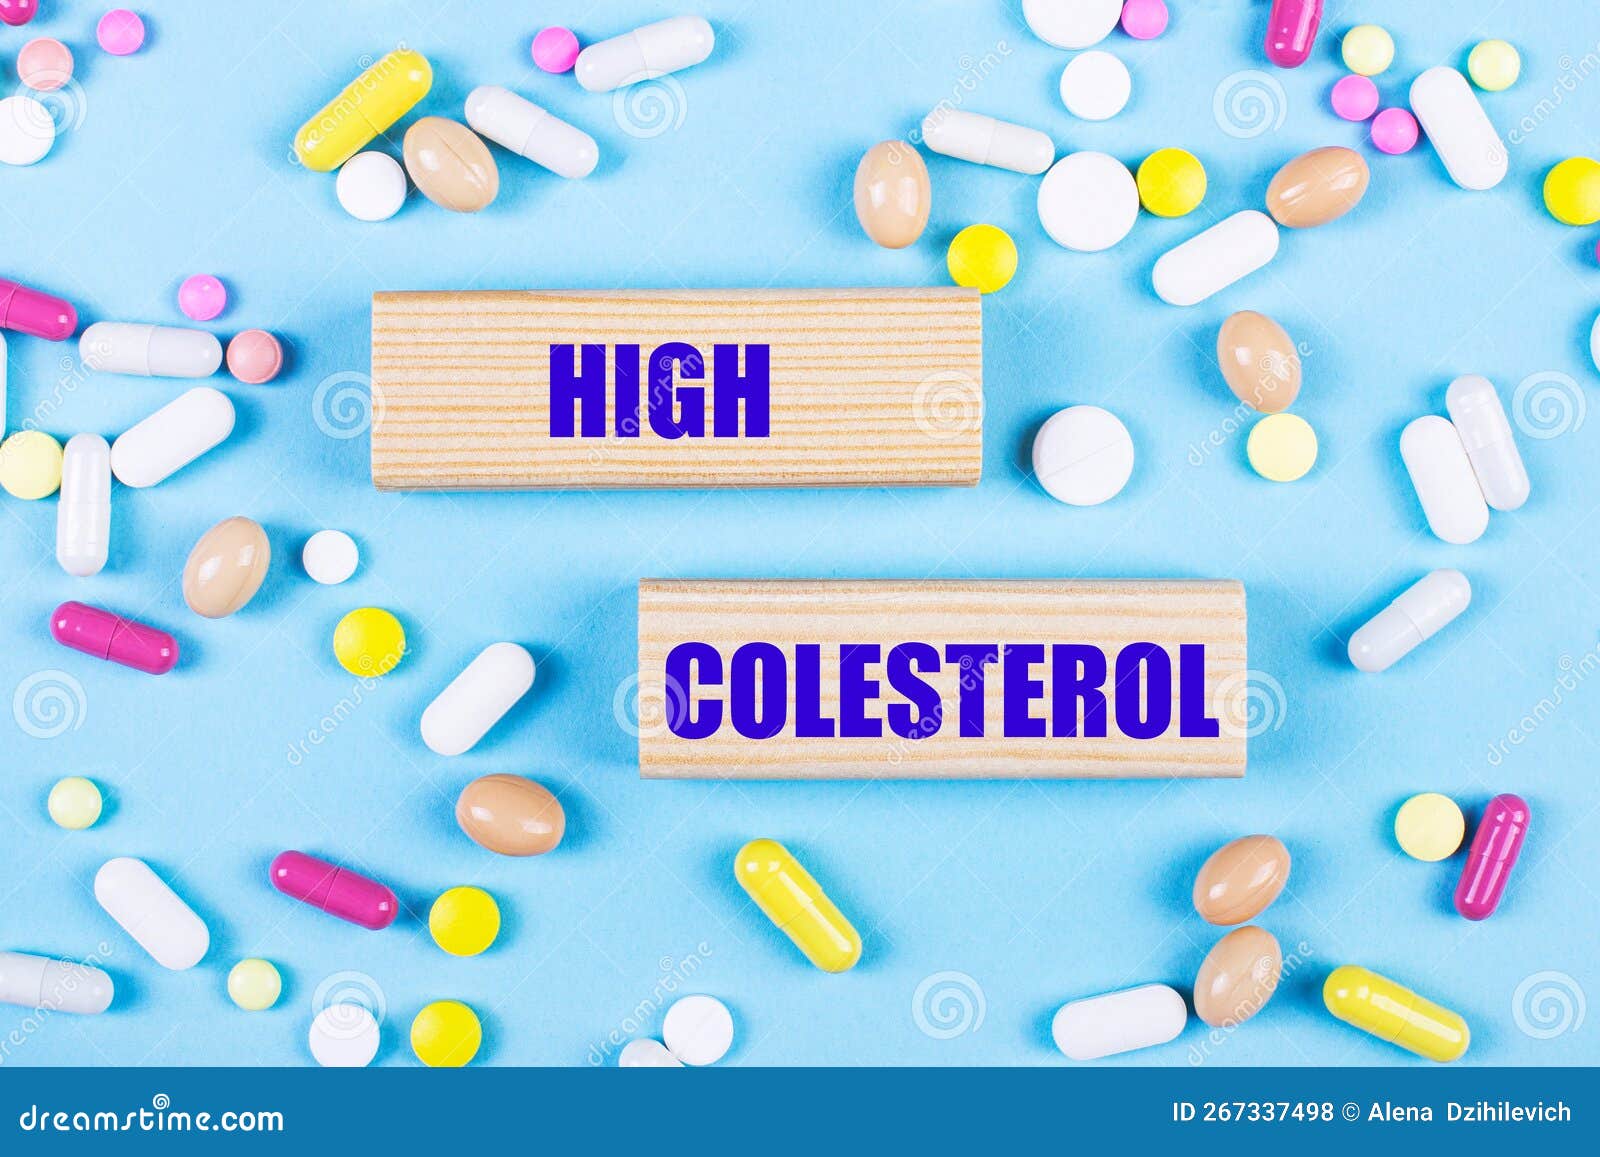 on a light blue background, multi-colored pills and wooden blocks with the text high colesterol. pharmaceutics. medical concept